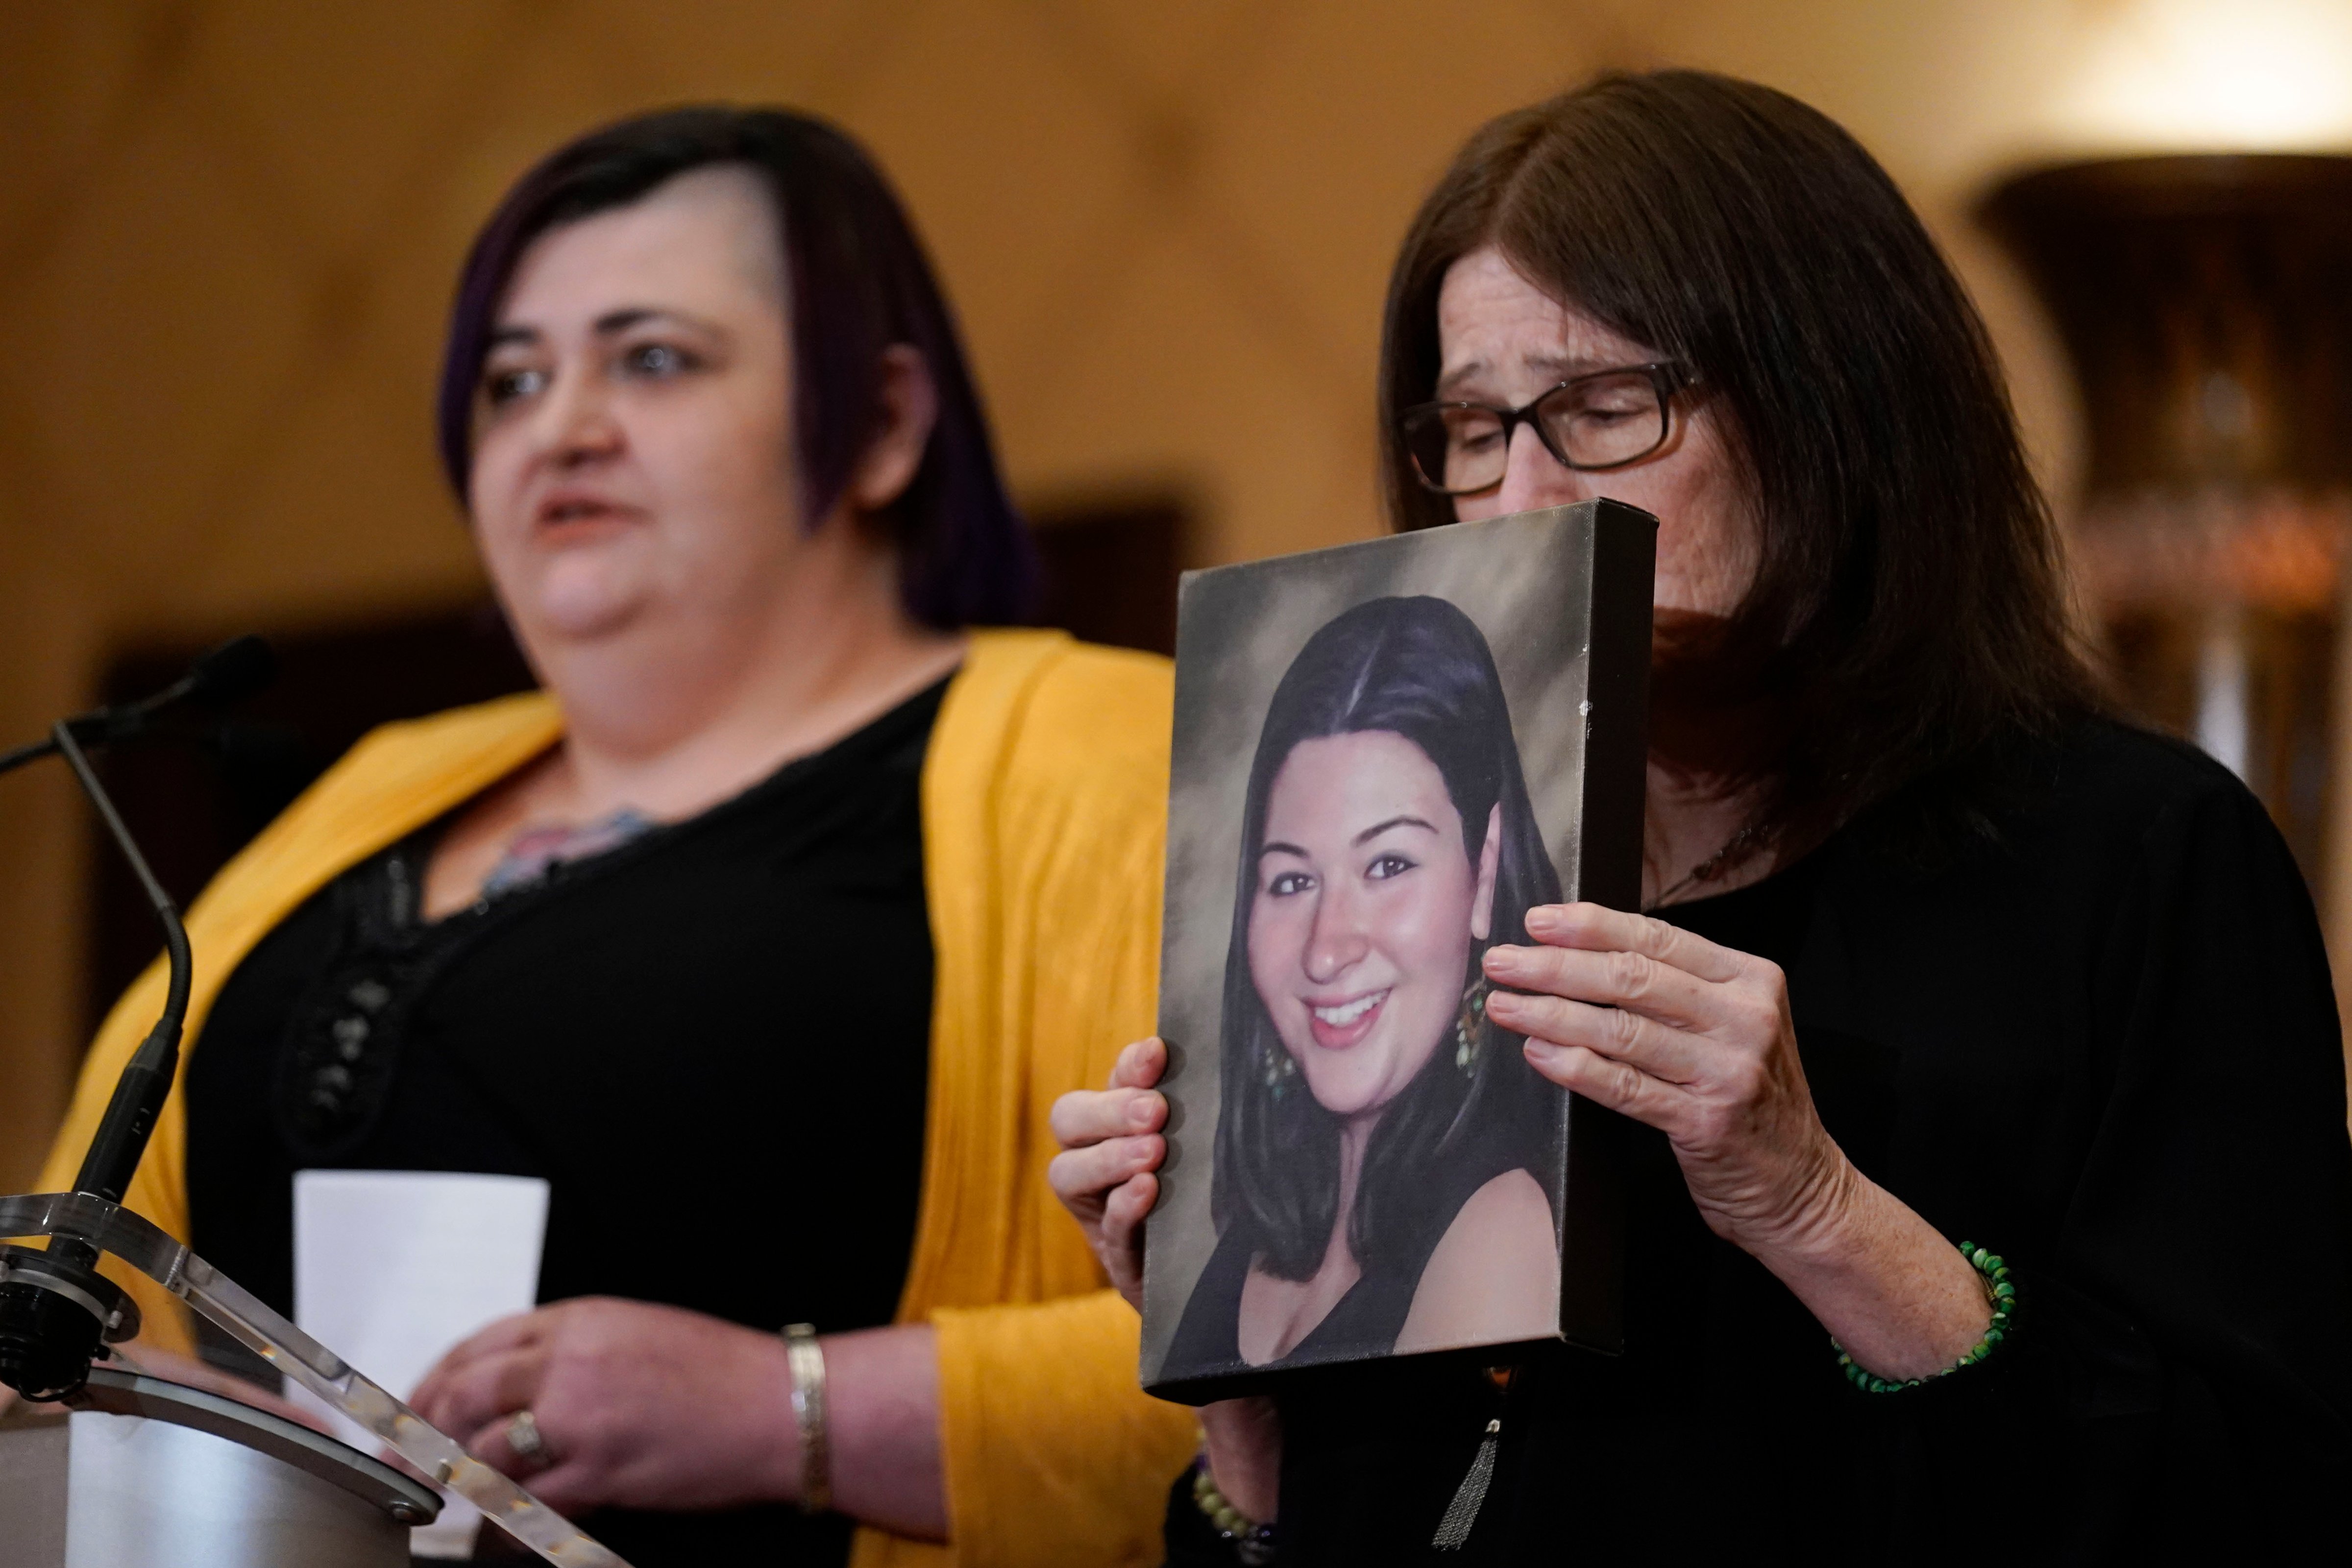 Hannah D'Avino, left, and Mary D'Avino display a picture of Rachel D'Avino, who was killed in the Sandy Hook school shooting, during a news conference in Trumbull, Conn., on Feb. 15, 2022. (Seth Wenig—Associated Press)